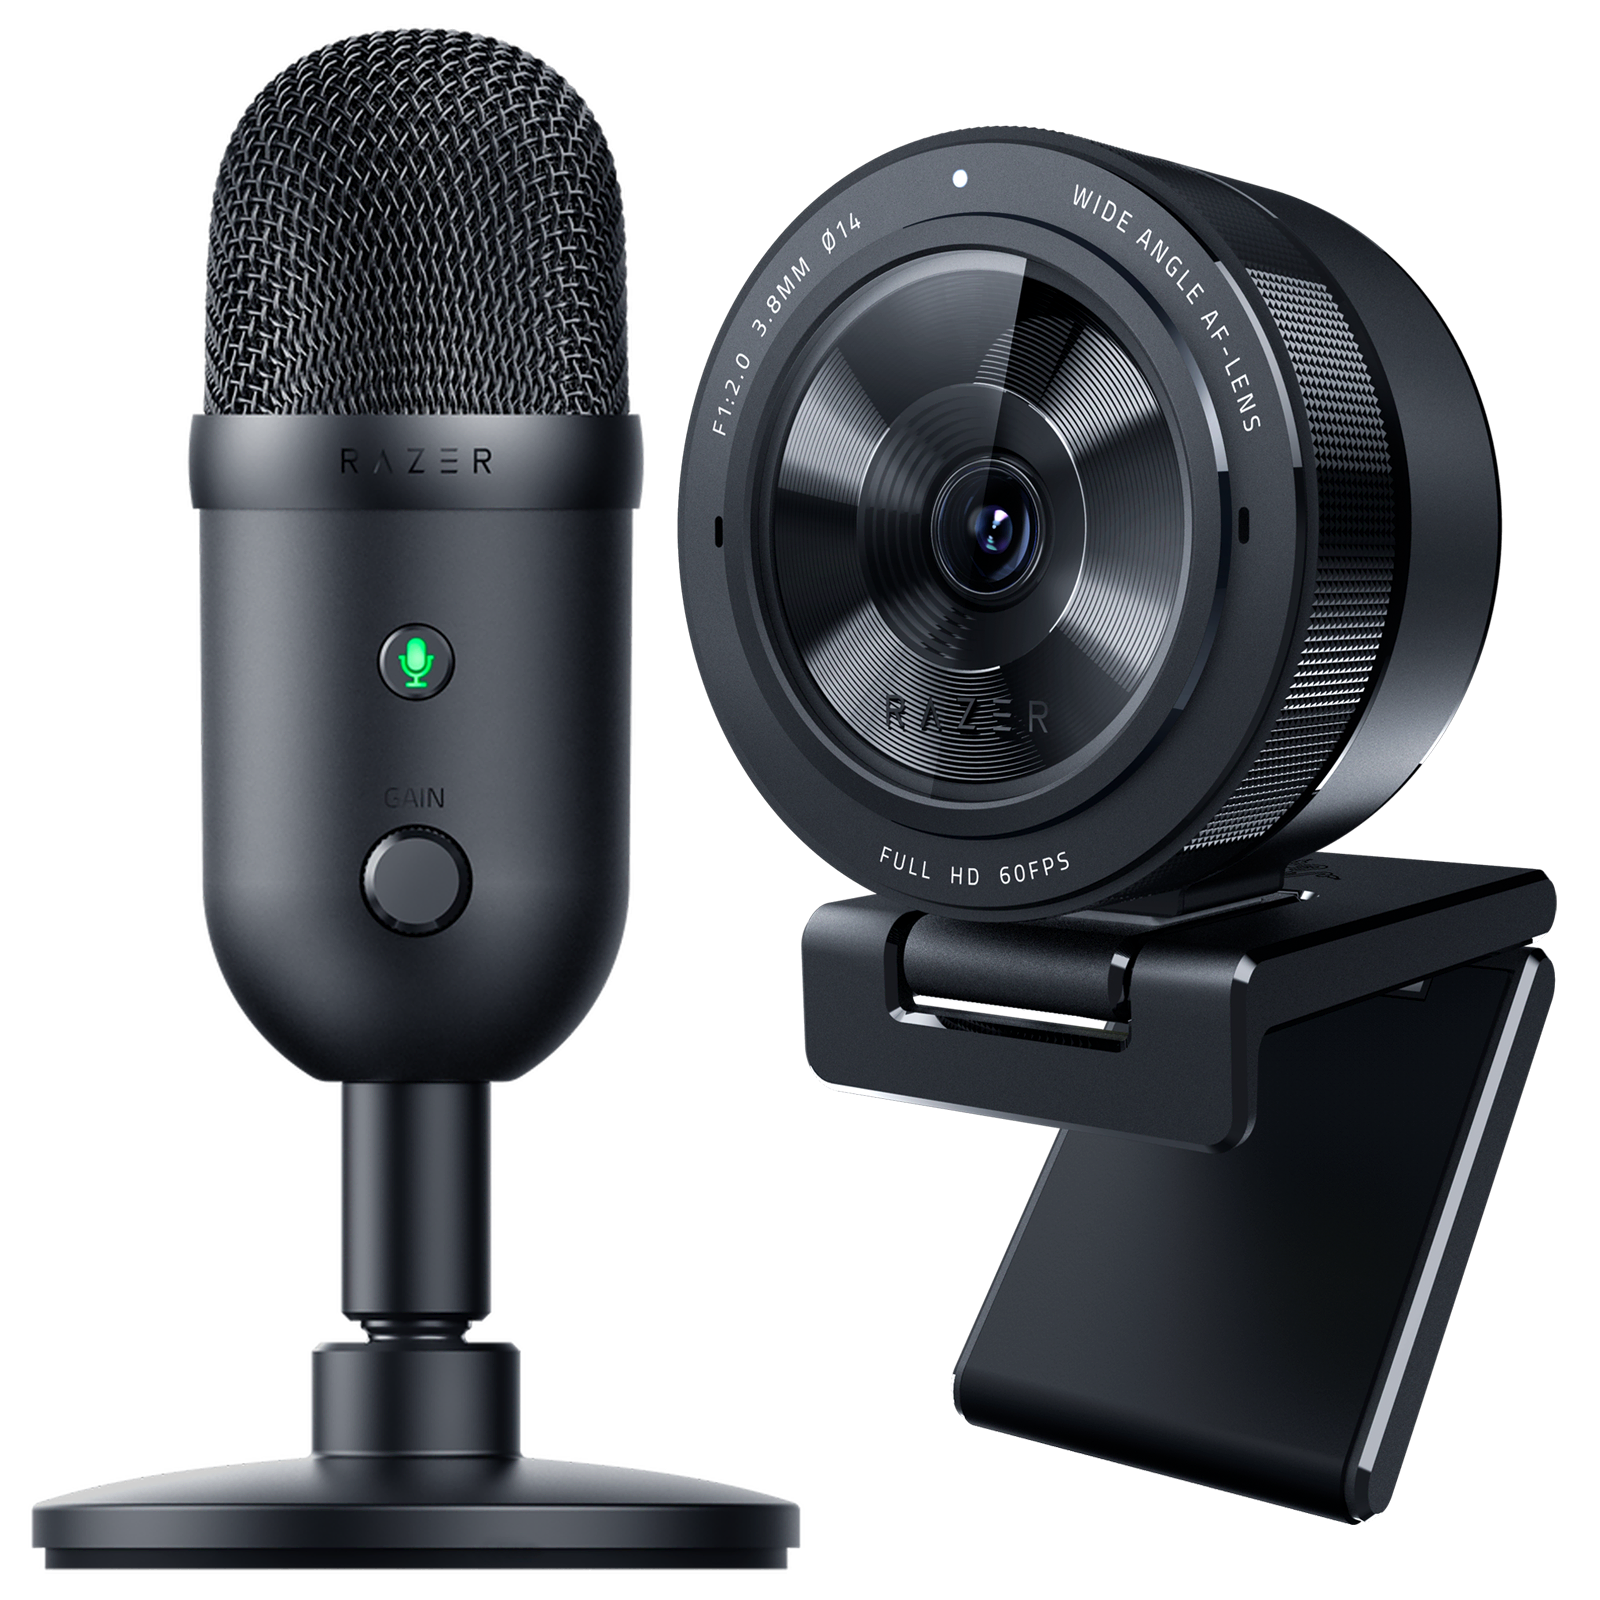 Razer Kiyo Pro webcam improves its image for game streamers and home  workers - CNET